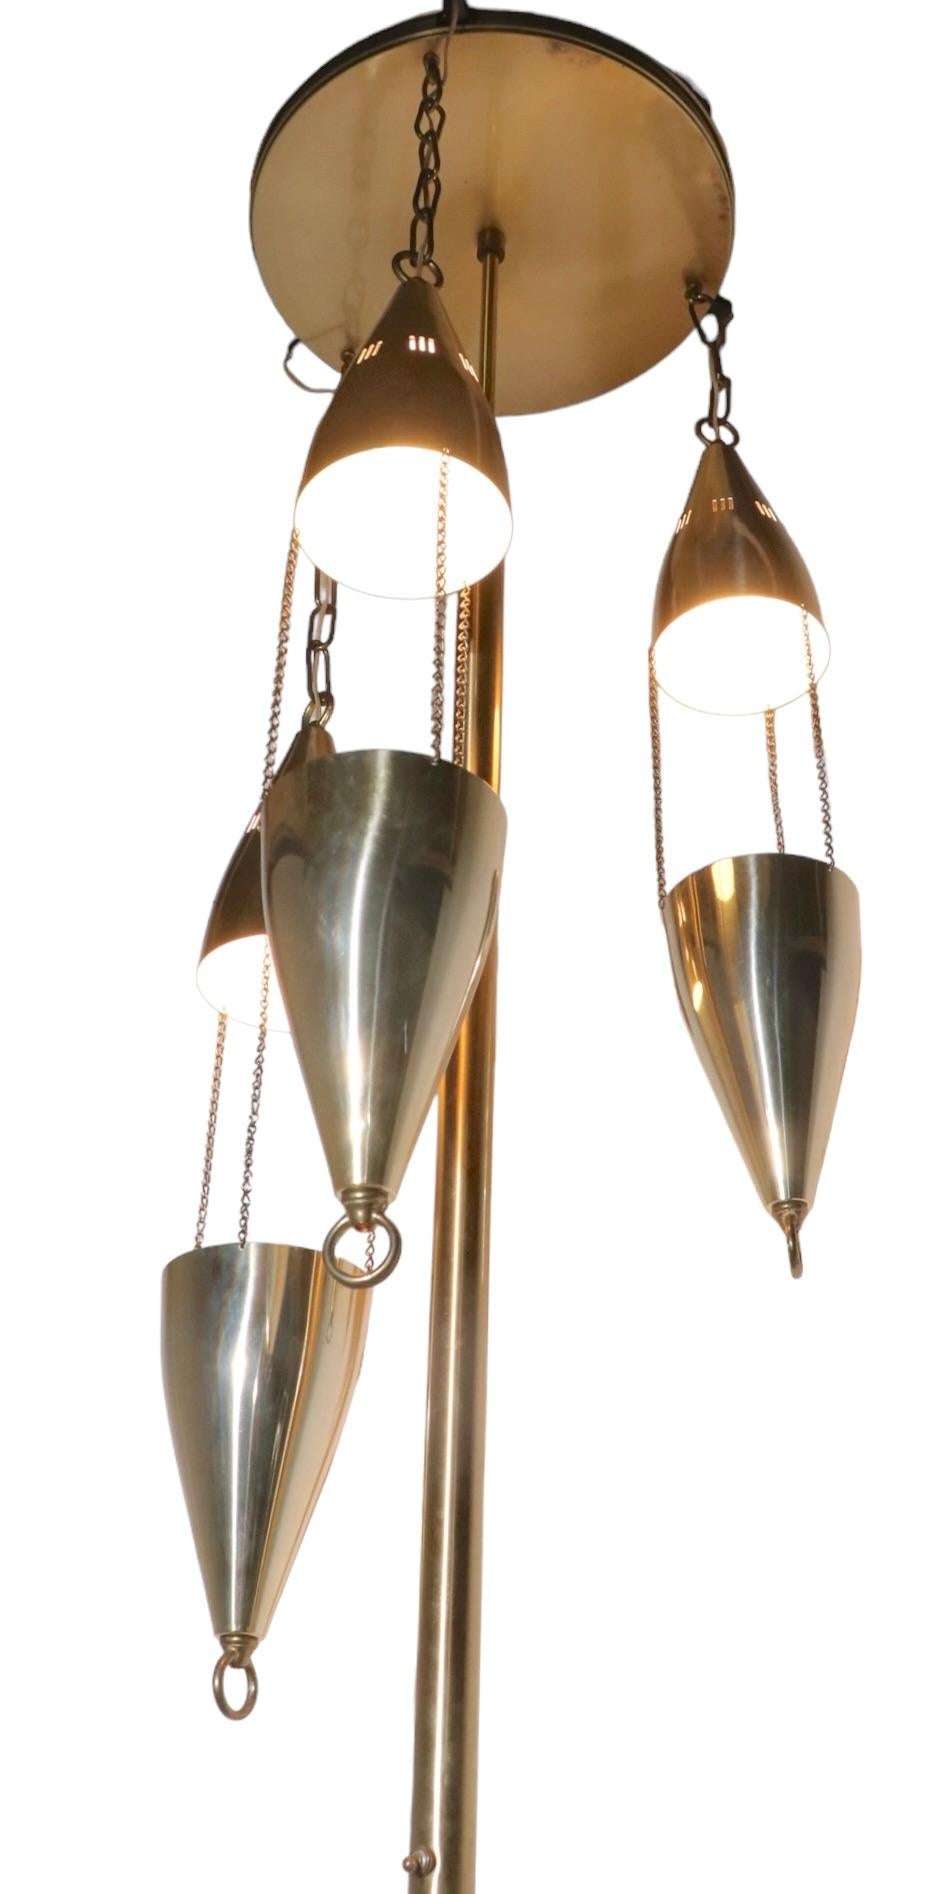 Chic architectural mid century tension pole lamp, with three pendant lights. The lamp is in brass finish, it is in exceptional, original, clean and working condition, ready to install. The lamp runs from the floor to the ceiling and stays vertical